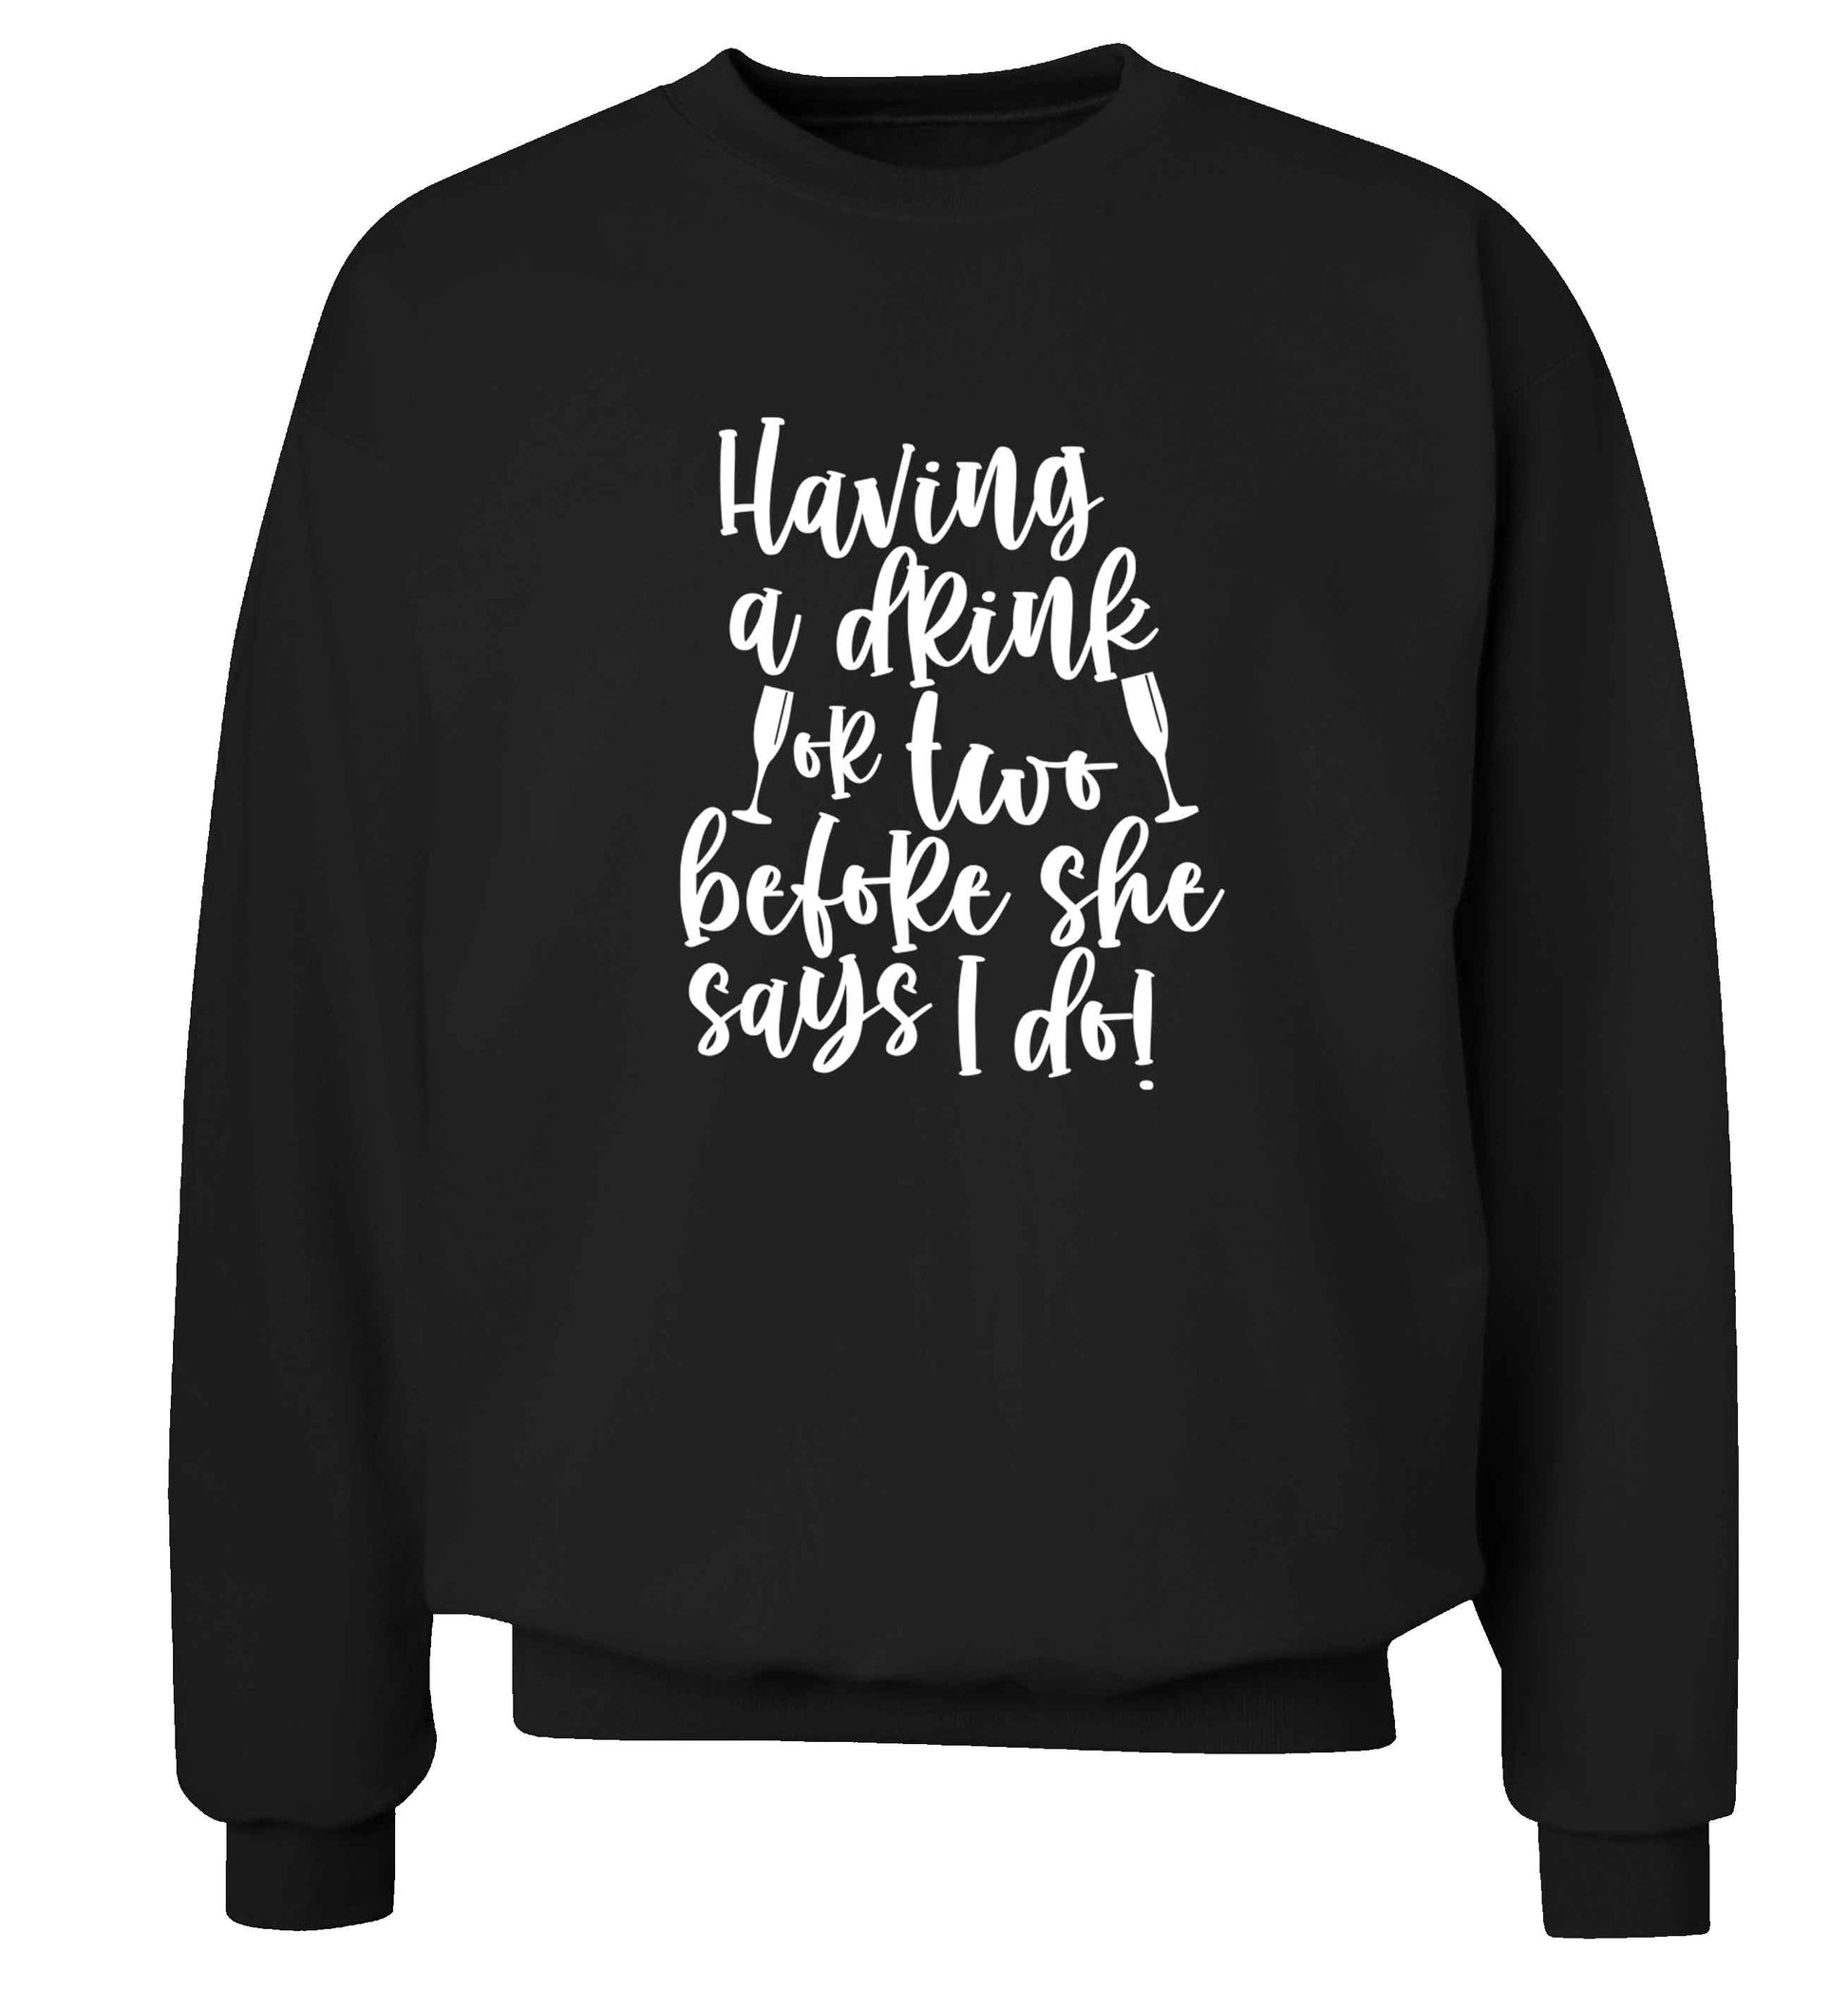 Having a drink or two before she says I do adult's unisex black sweater 2XL